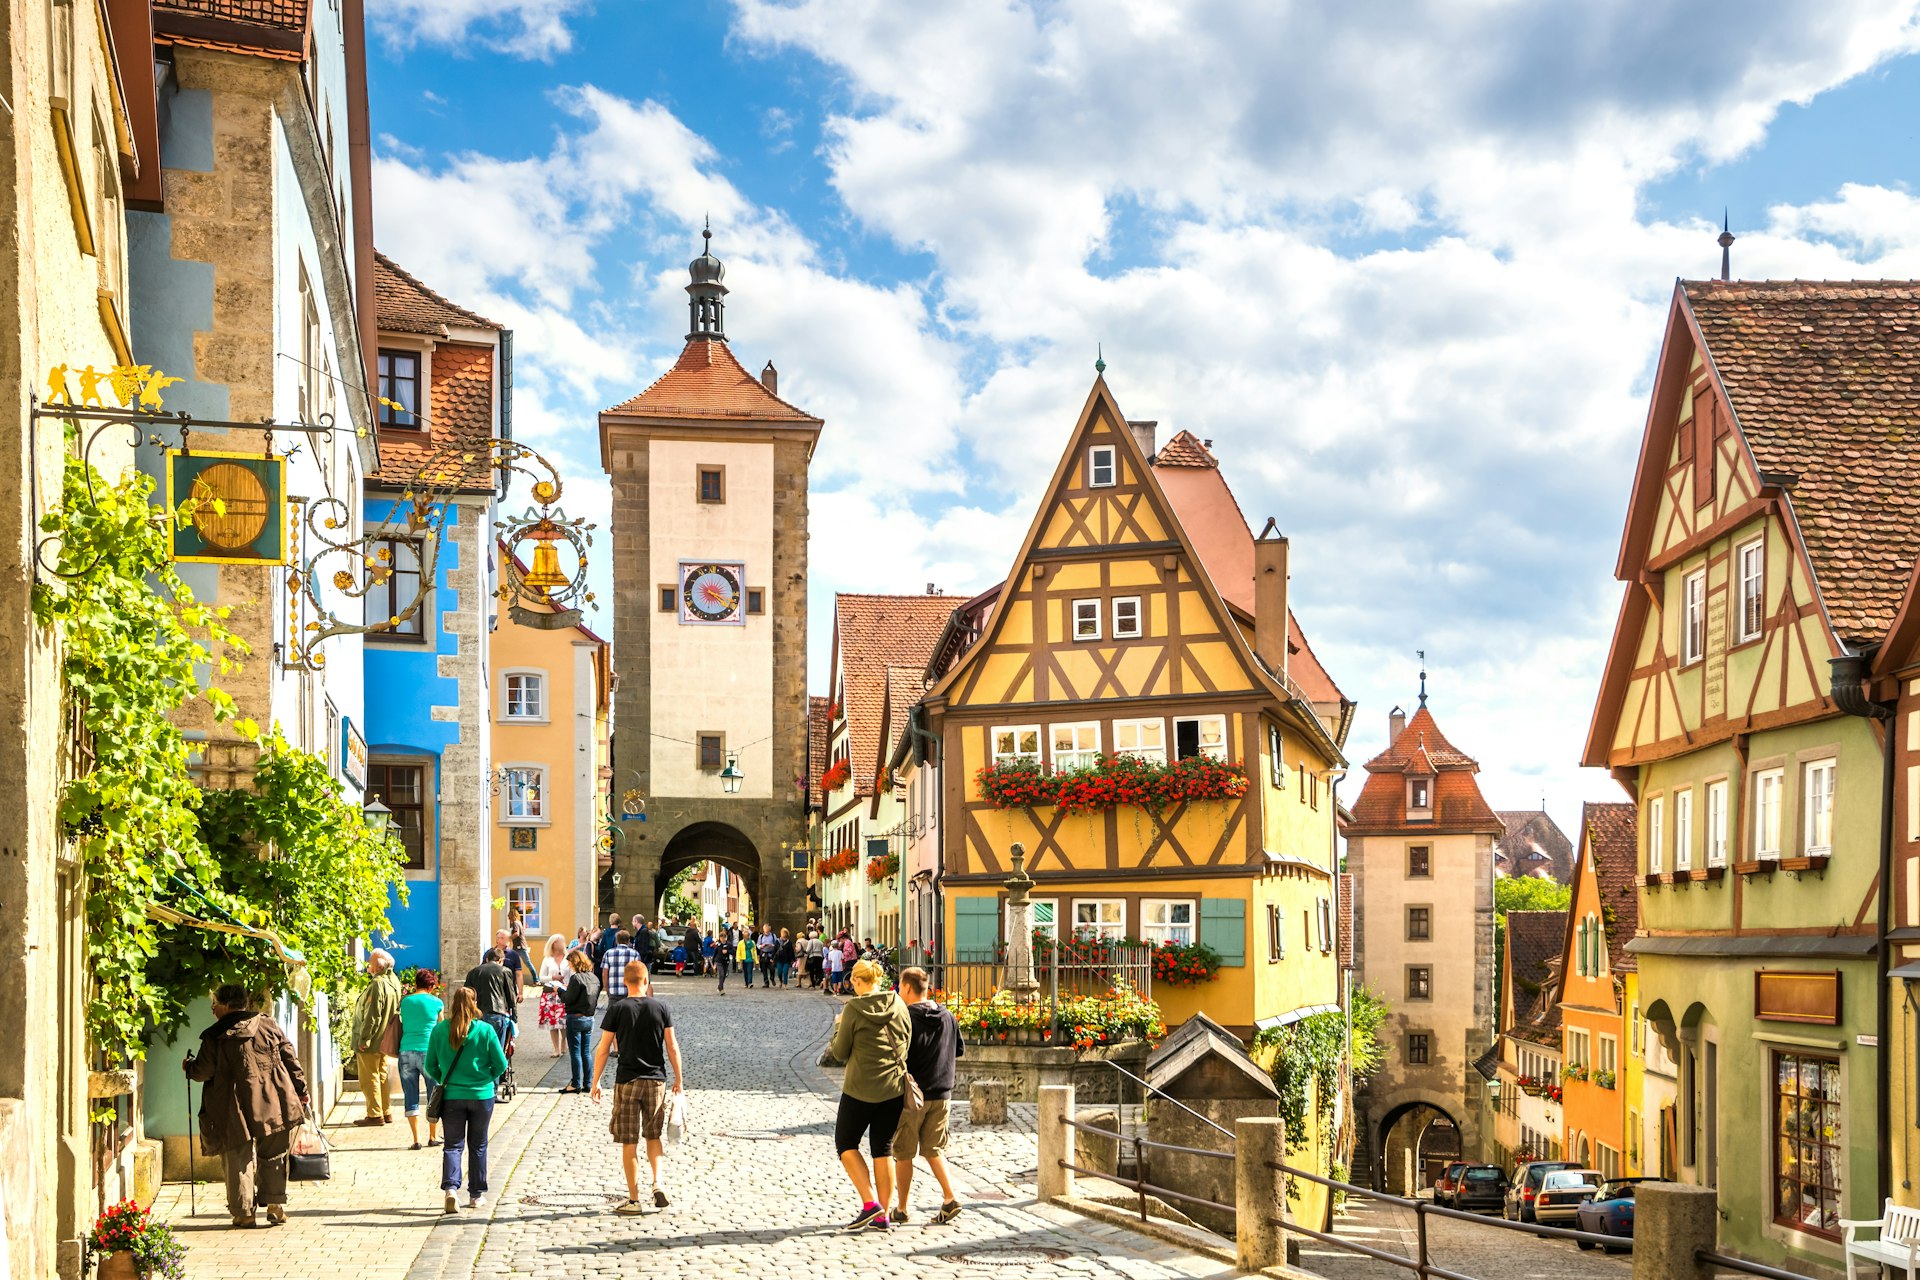 Timber-framed houses and a clock tower in Rothenburg ob der Tauber, Germany